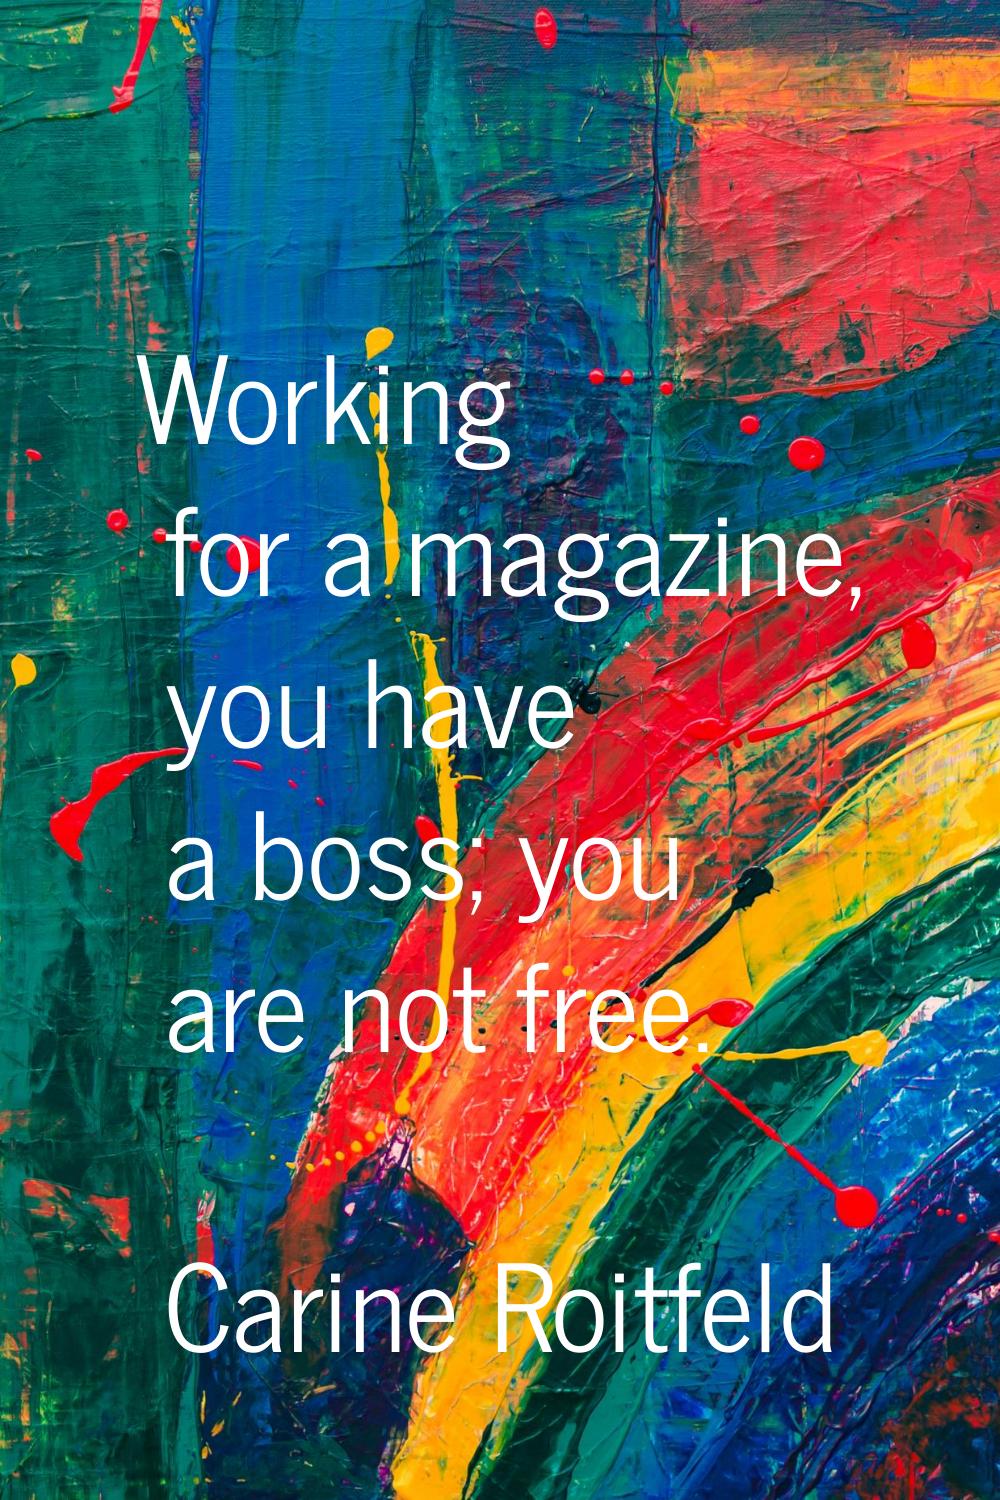 Working for a magazine, you have a boss; you are not free.